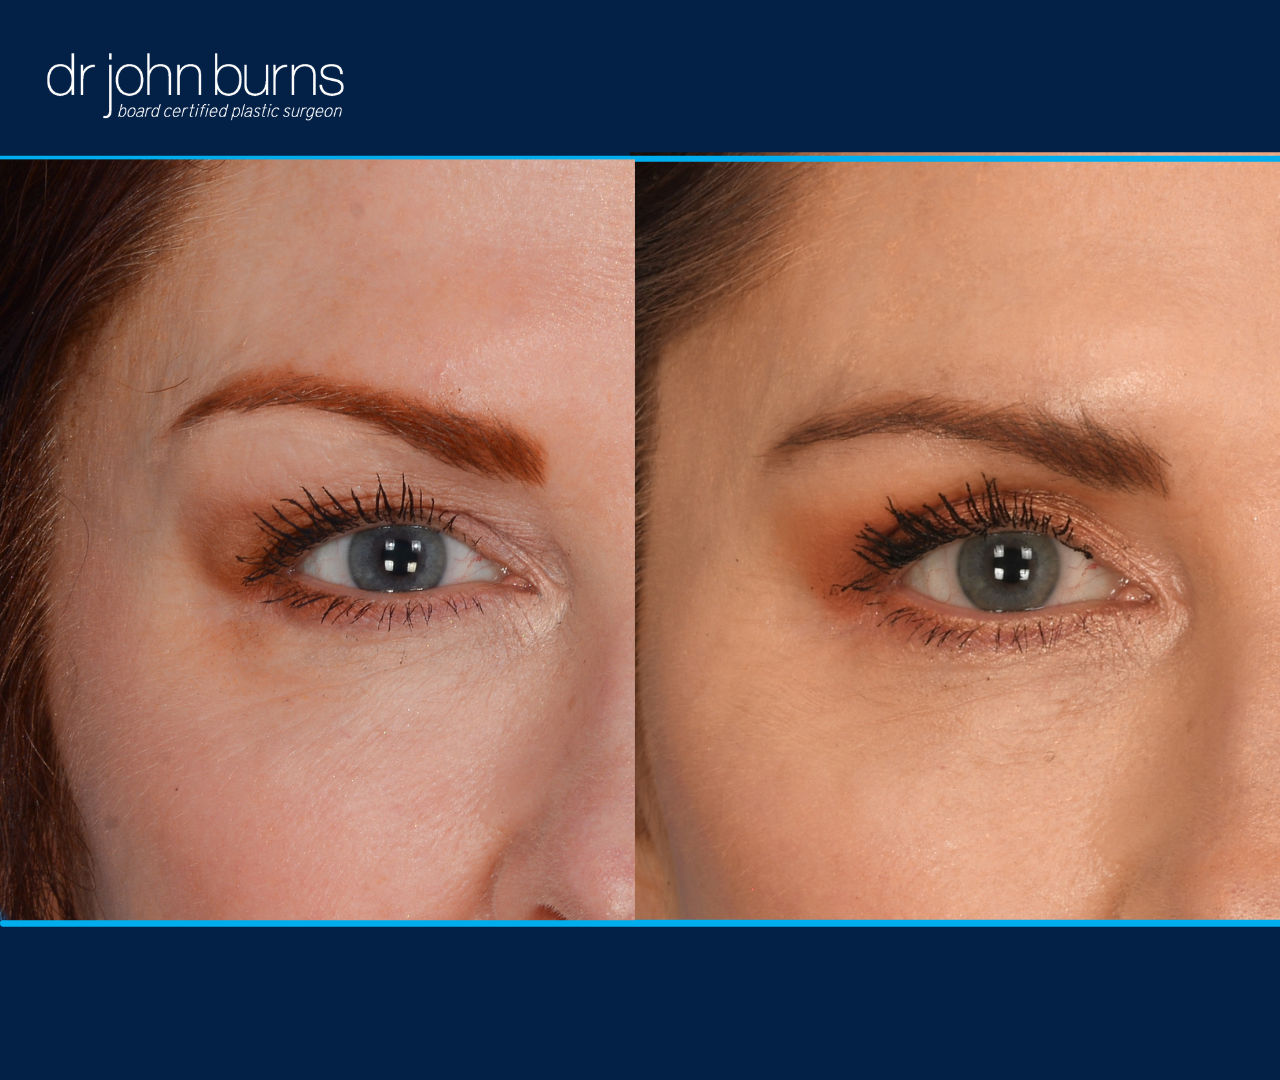 right eye view | before and after eyelid surgery in Dallas, Texas